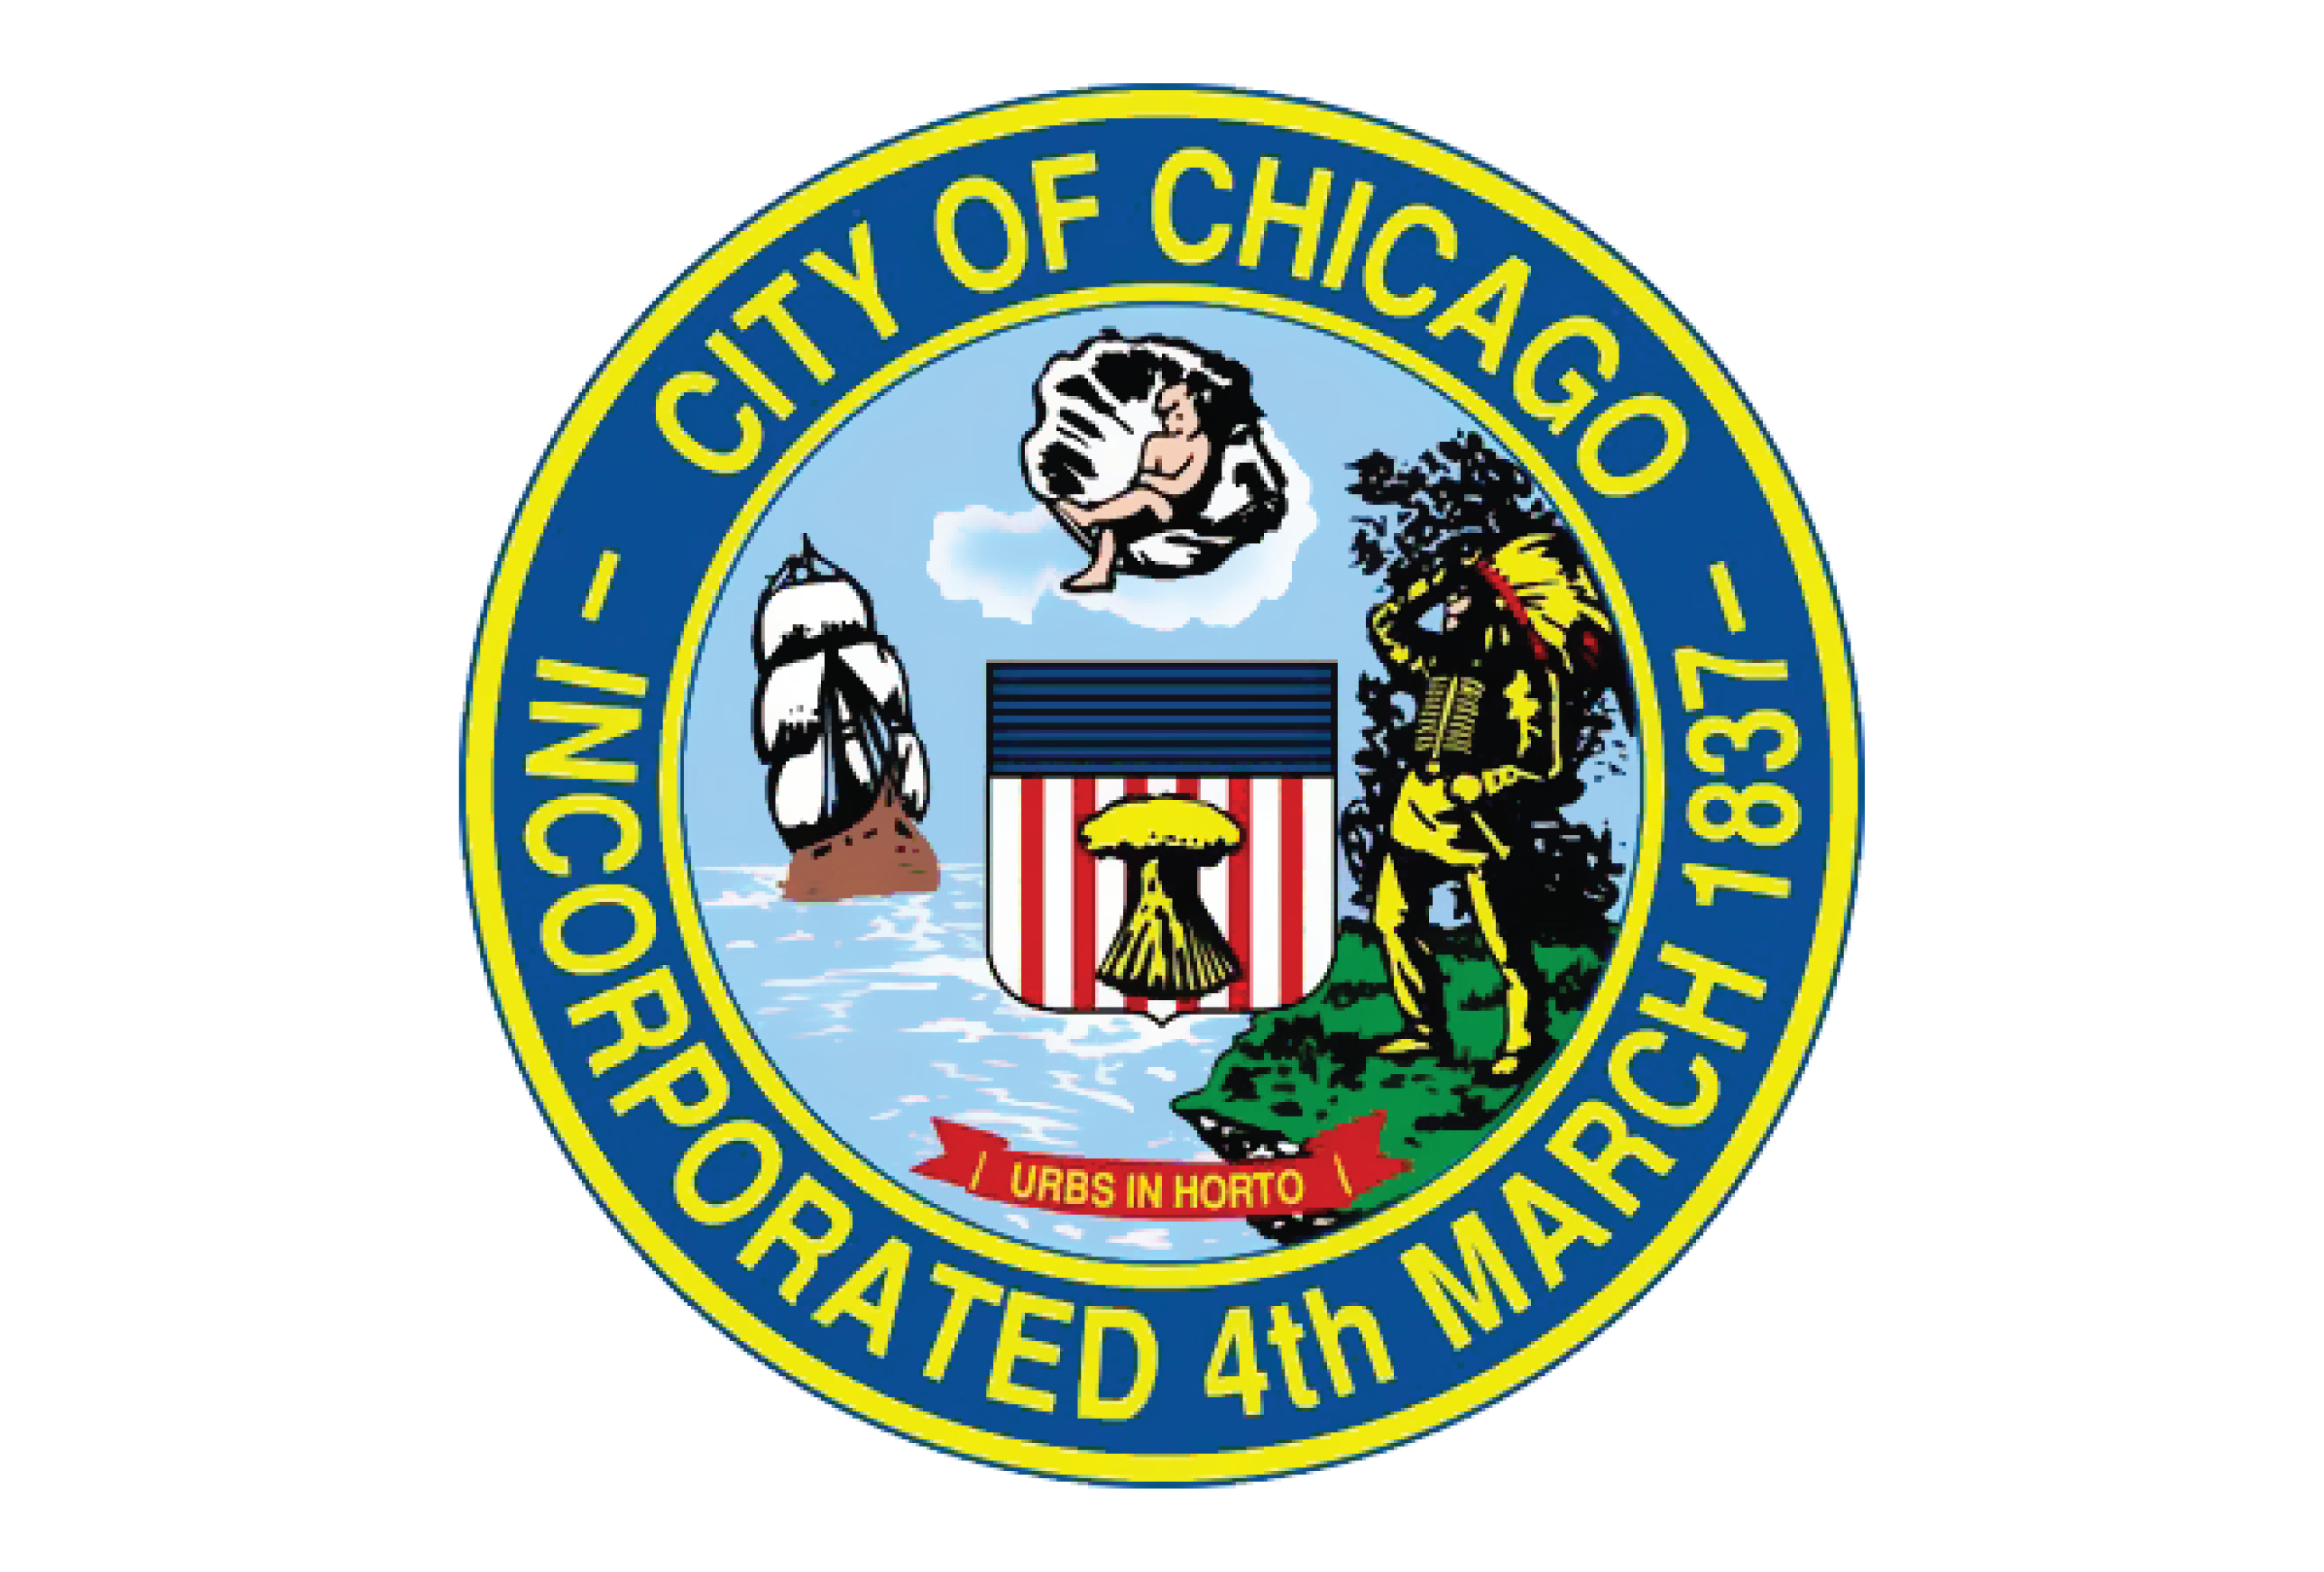 City of Chicago seal